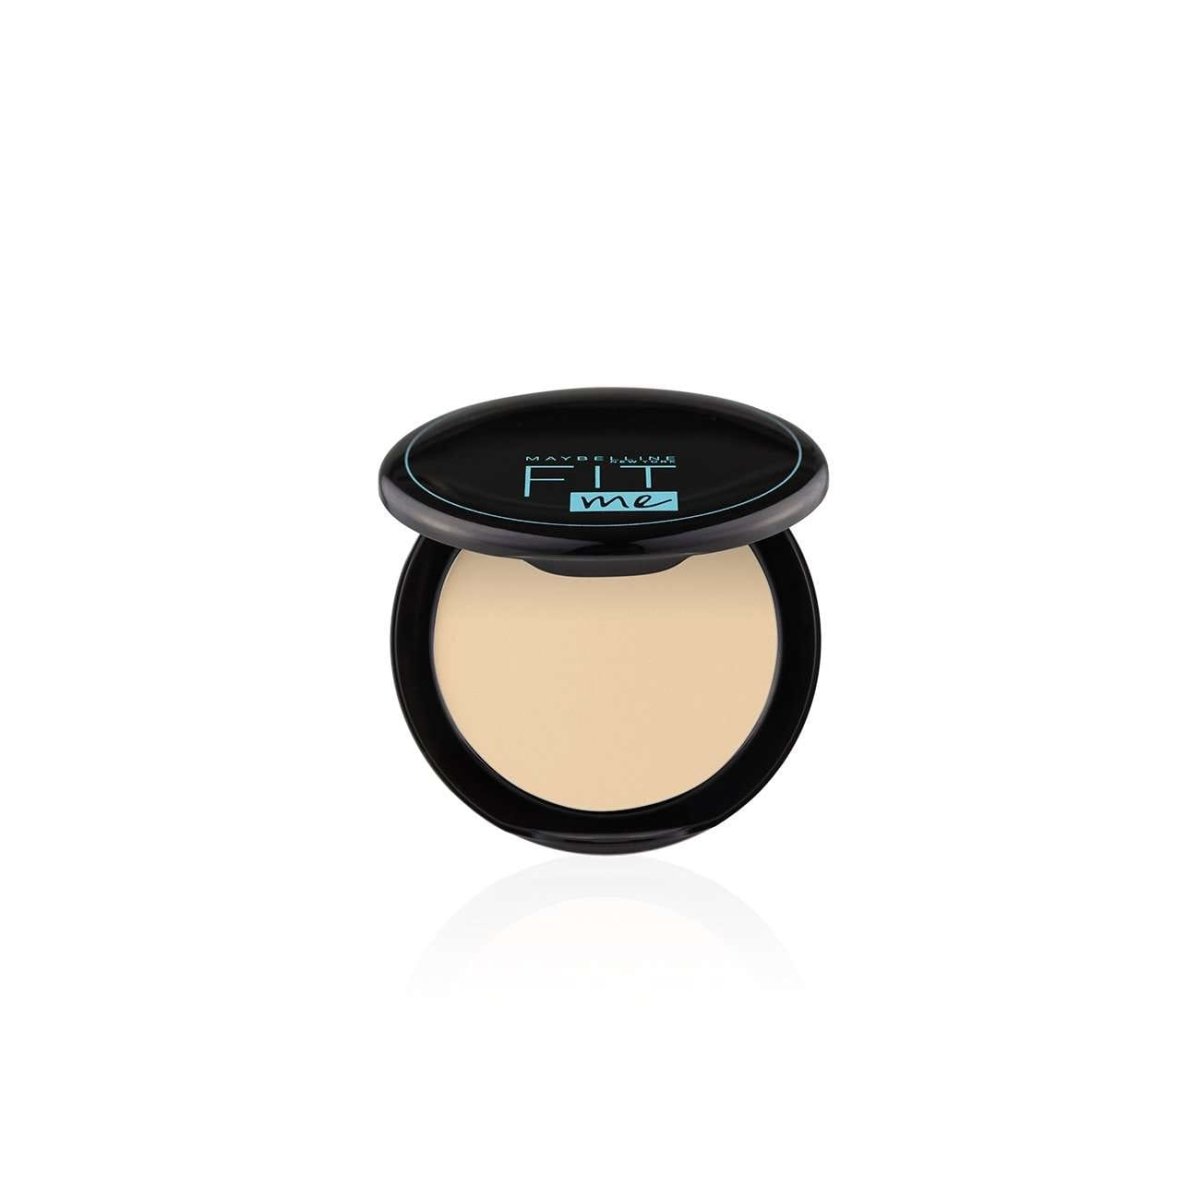 Maybelline New York Fit Me Compact Powder 109 Light Ivory 6gm